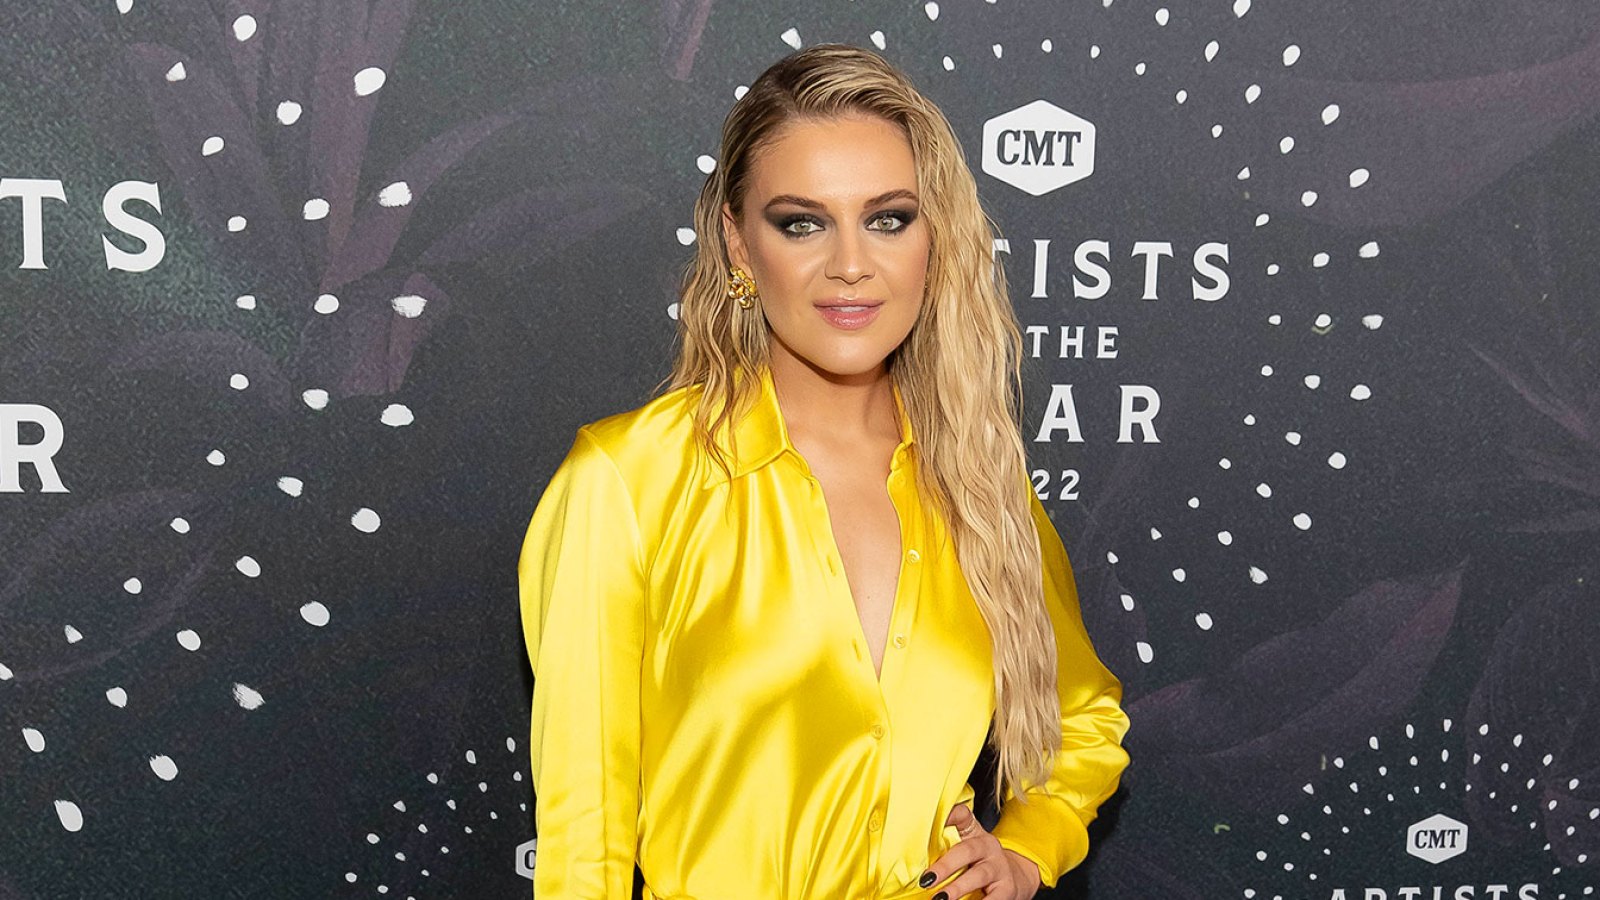 Kelsea Ballerini to Move the Narrative With New Version of Divorce Album